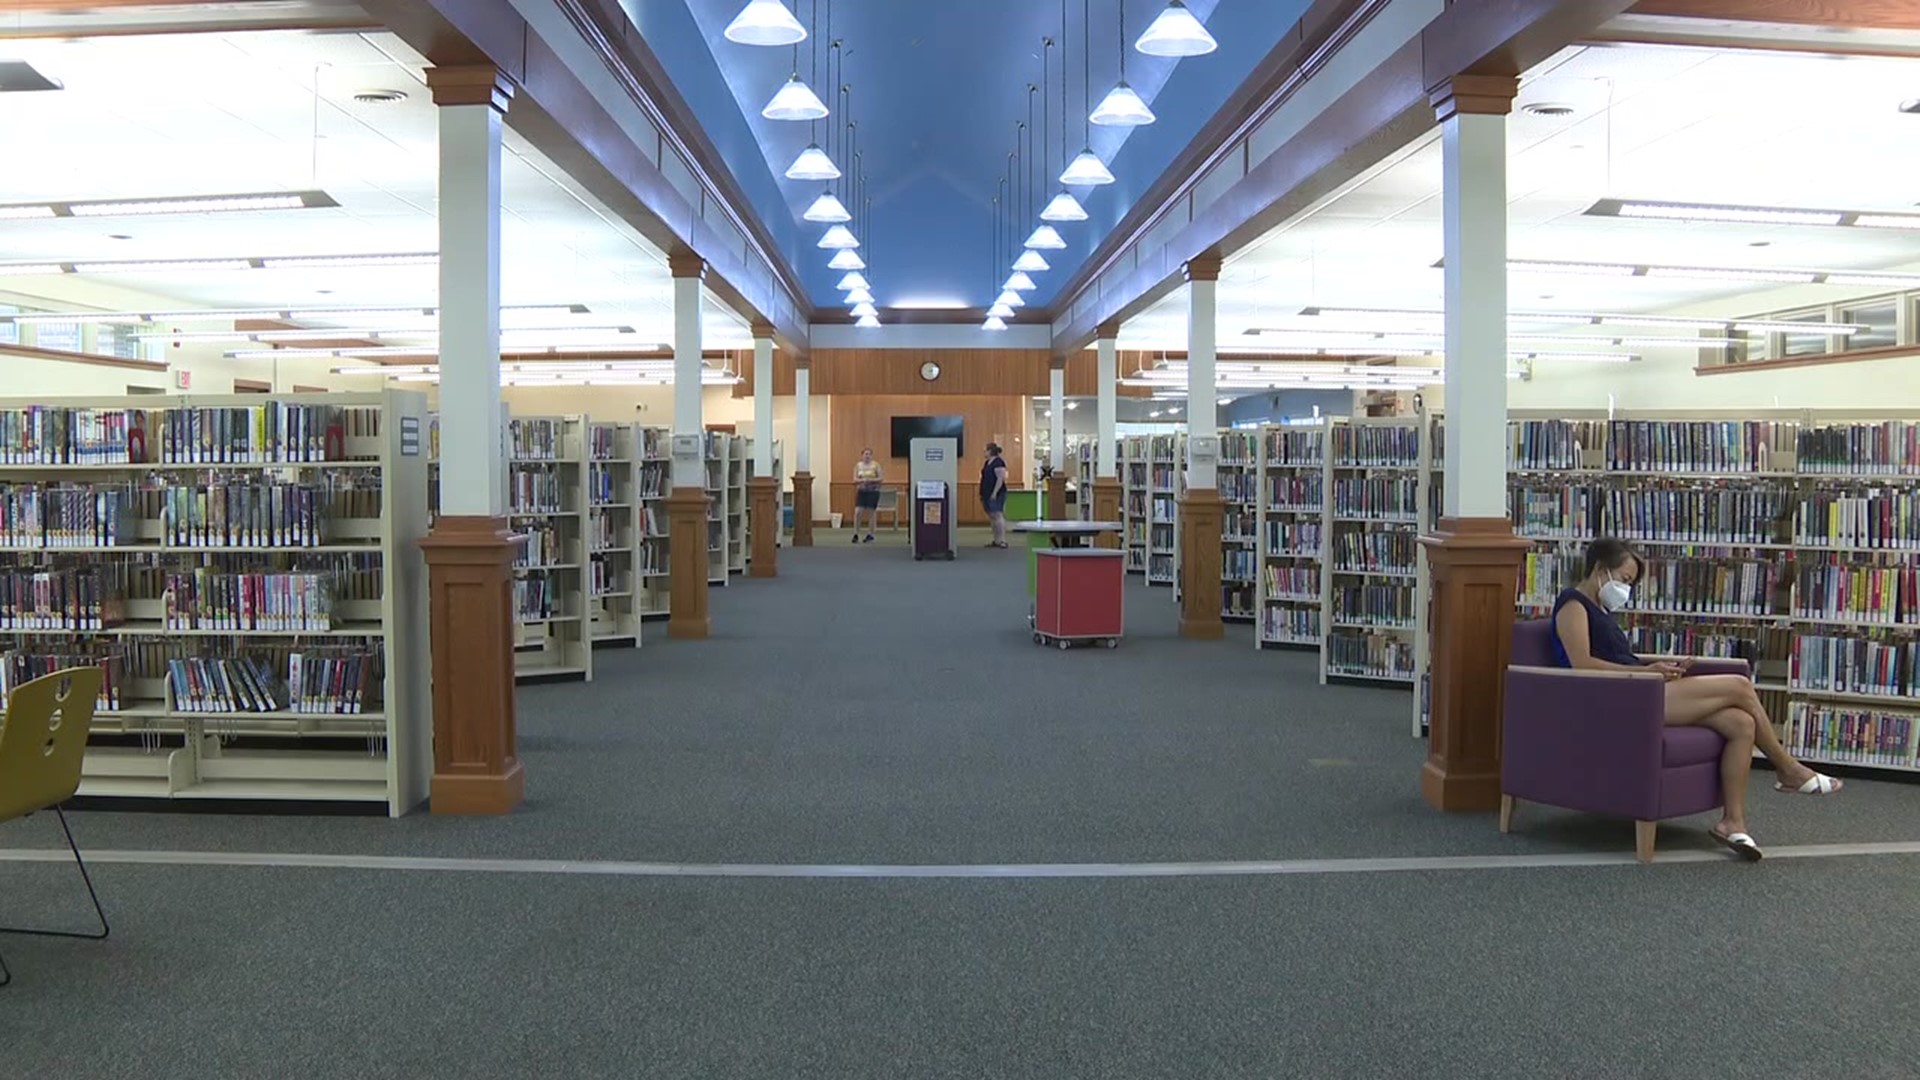 The library near Lewisburg is open again after being closed since last fall for renovations.